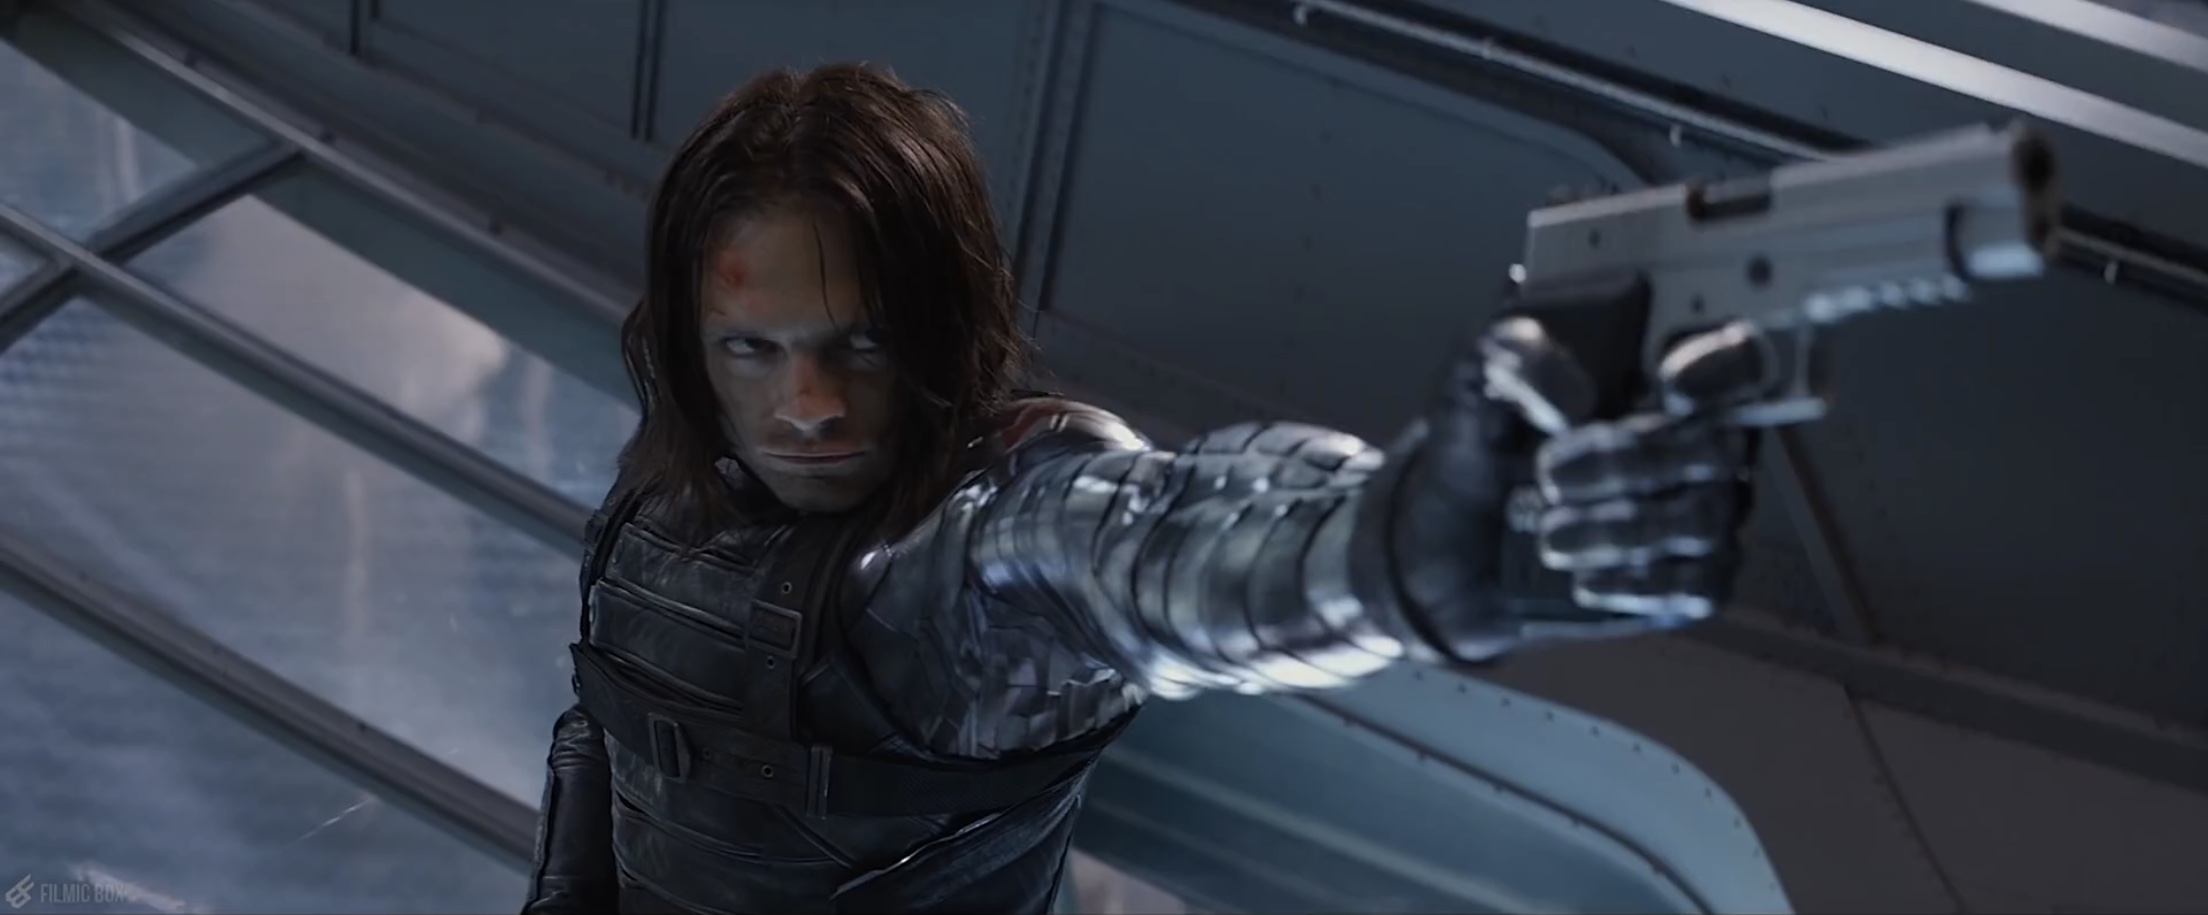 Winter Soldier/Bucky barnes shooting at Captain America